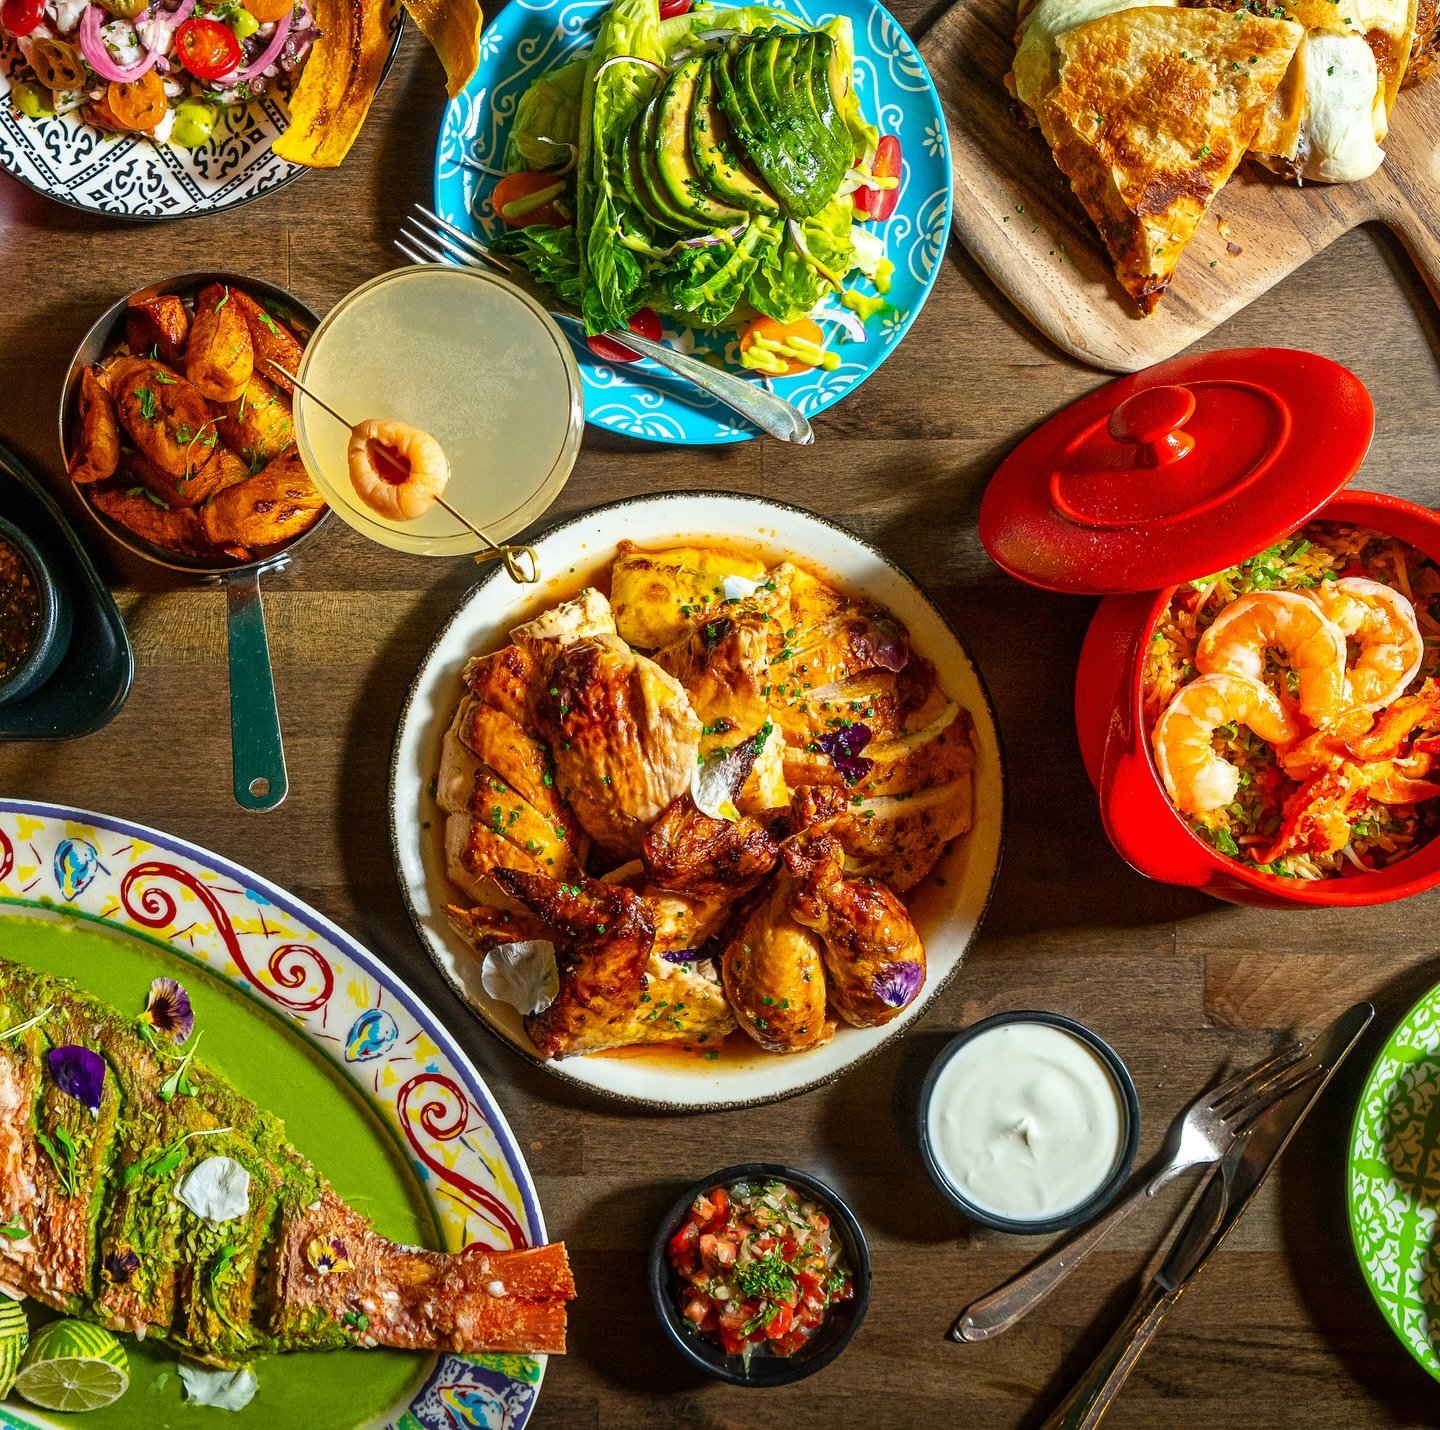 Bringing the flavors of Latin America to life at Chica &amp; The Don! 🌶️🥑🍹 Come taste the vibrant colors and bold tastes of our dishes! #LatinFlavors #ChicaAndTheDon #NewRestaurant